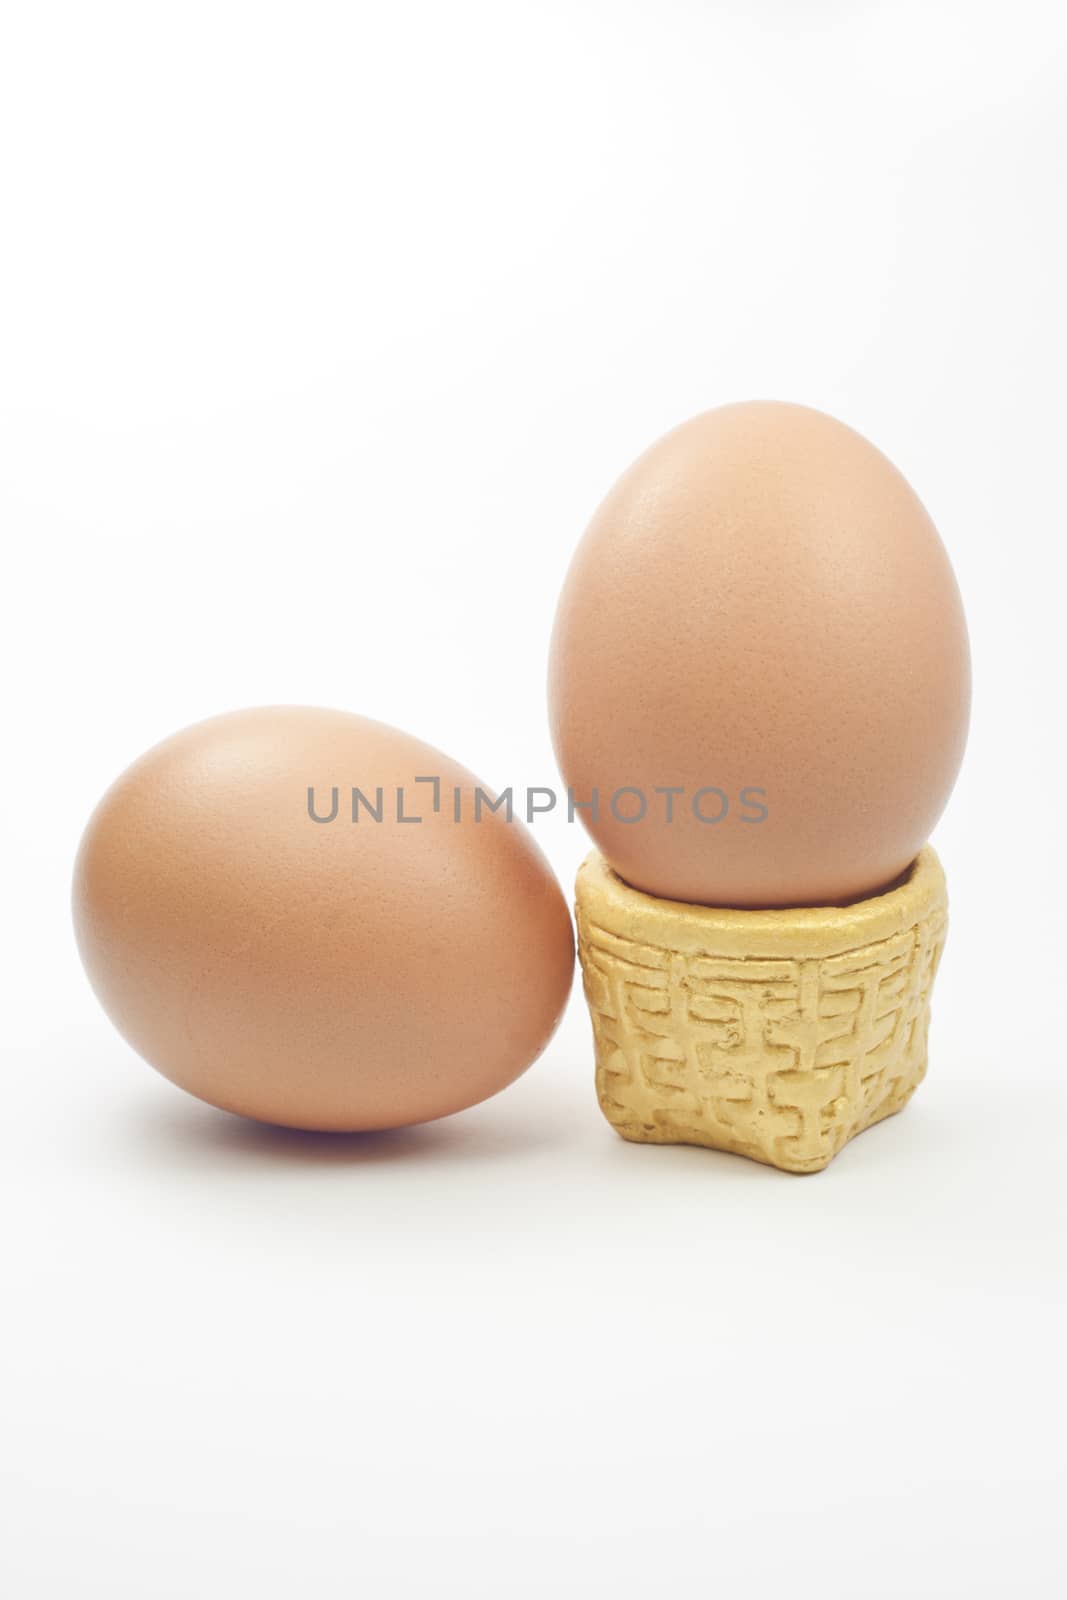 egg is popular food in the world